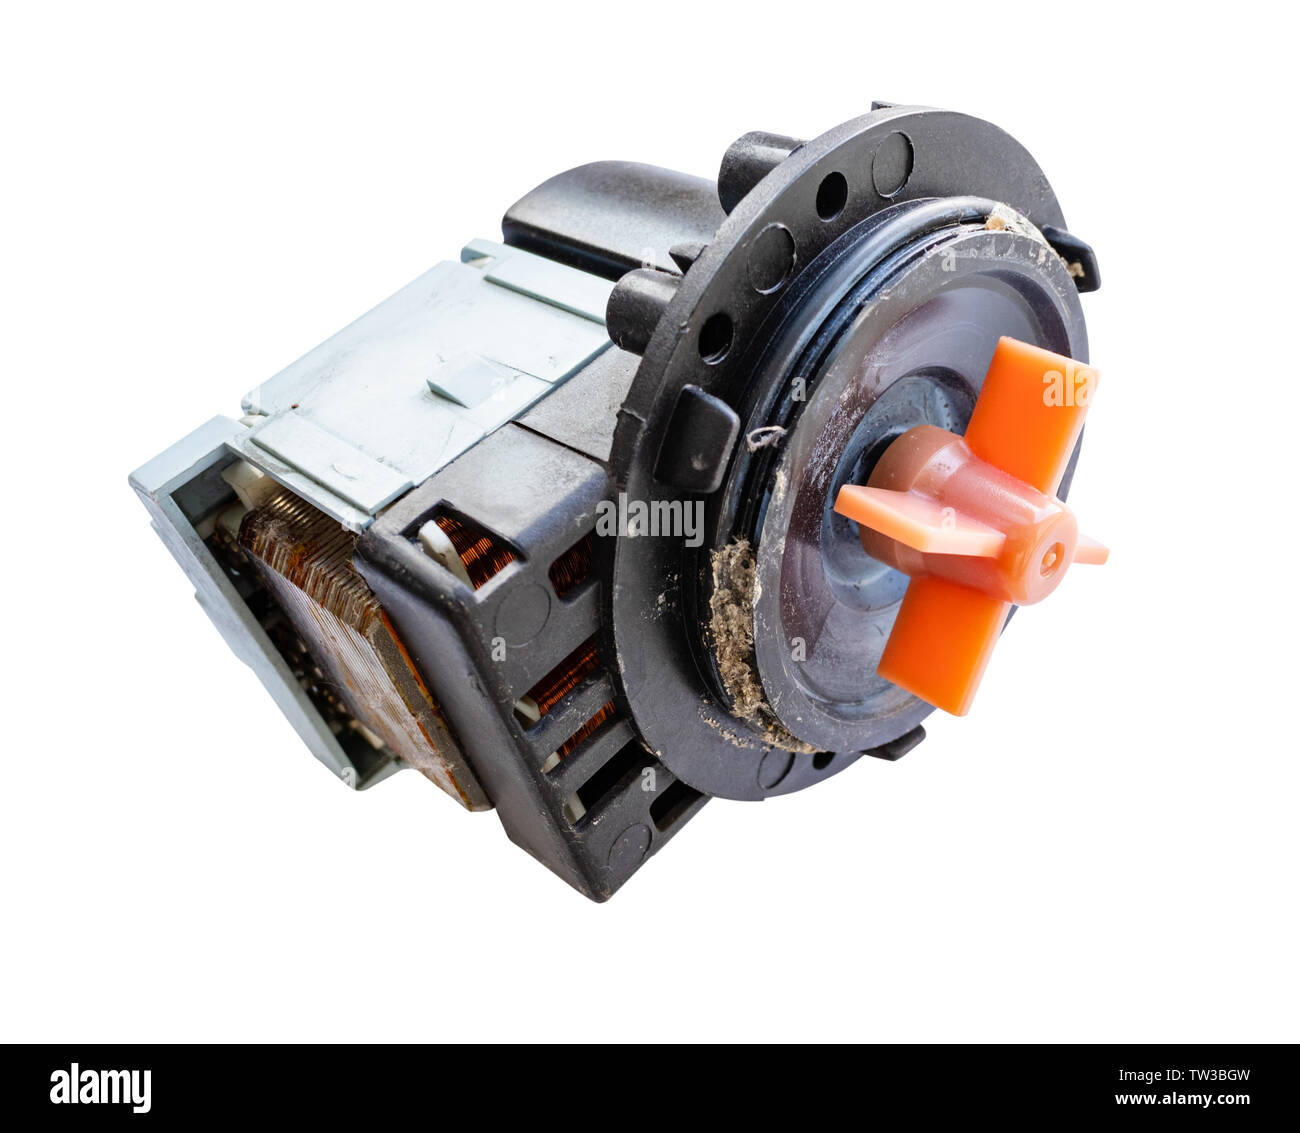 used water pump motor of old washing machine cut out on white background Stock Photo